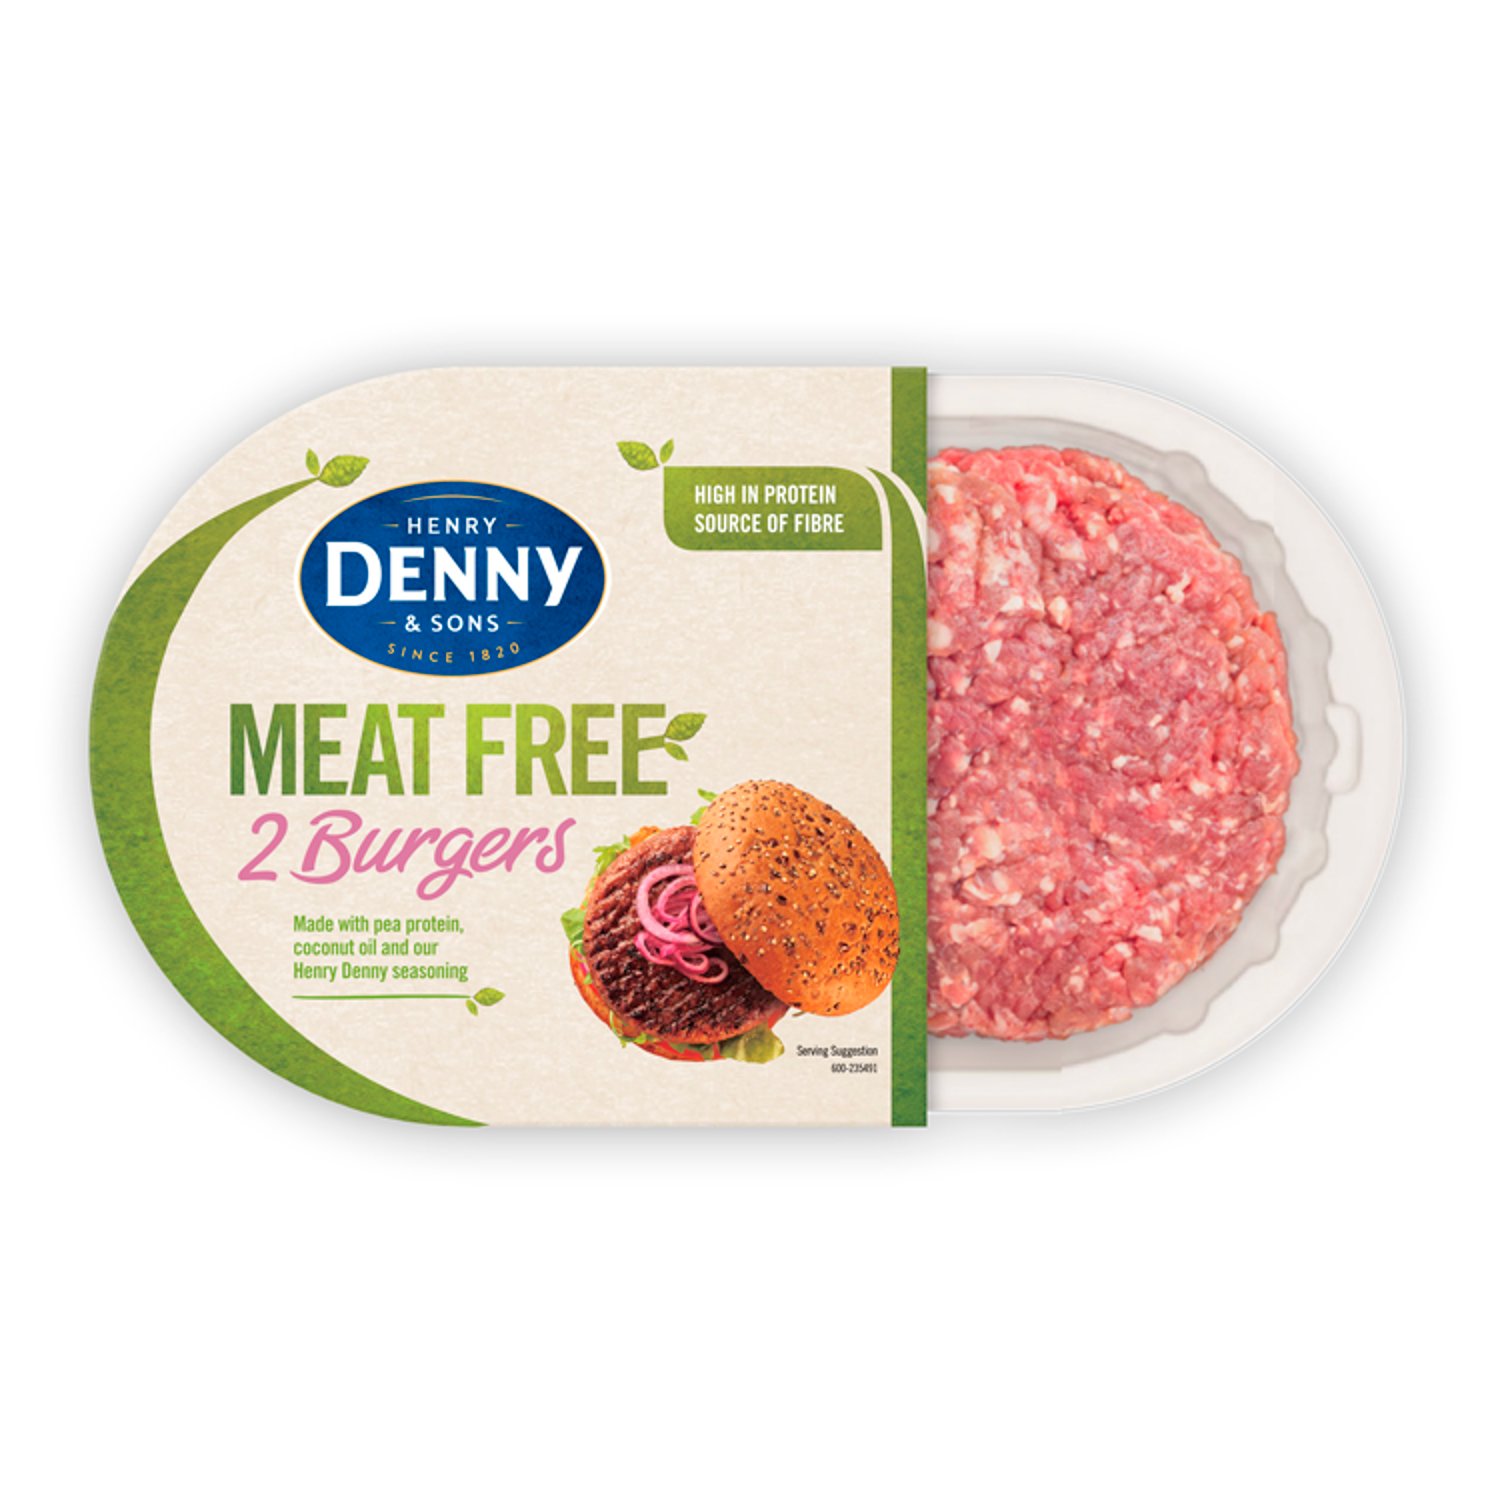 Denny Meat Free Burgers 2 Pack (227 g)